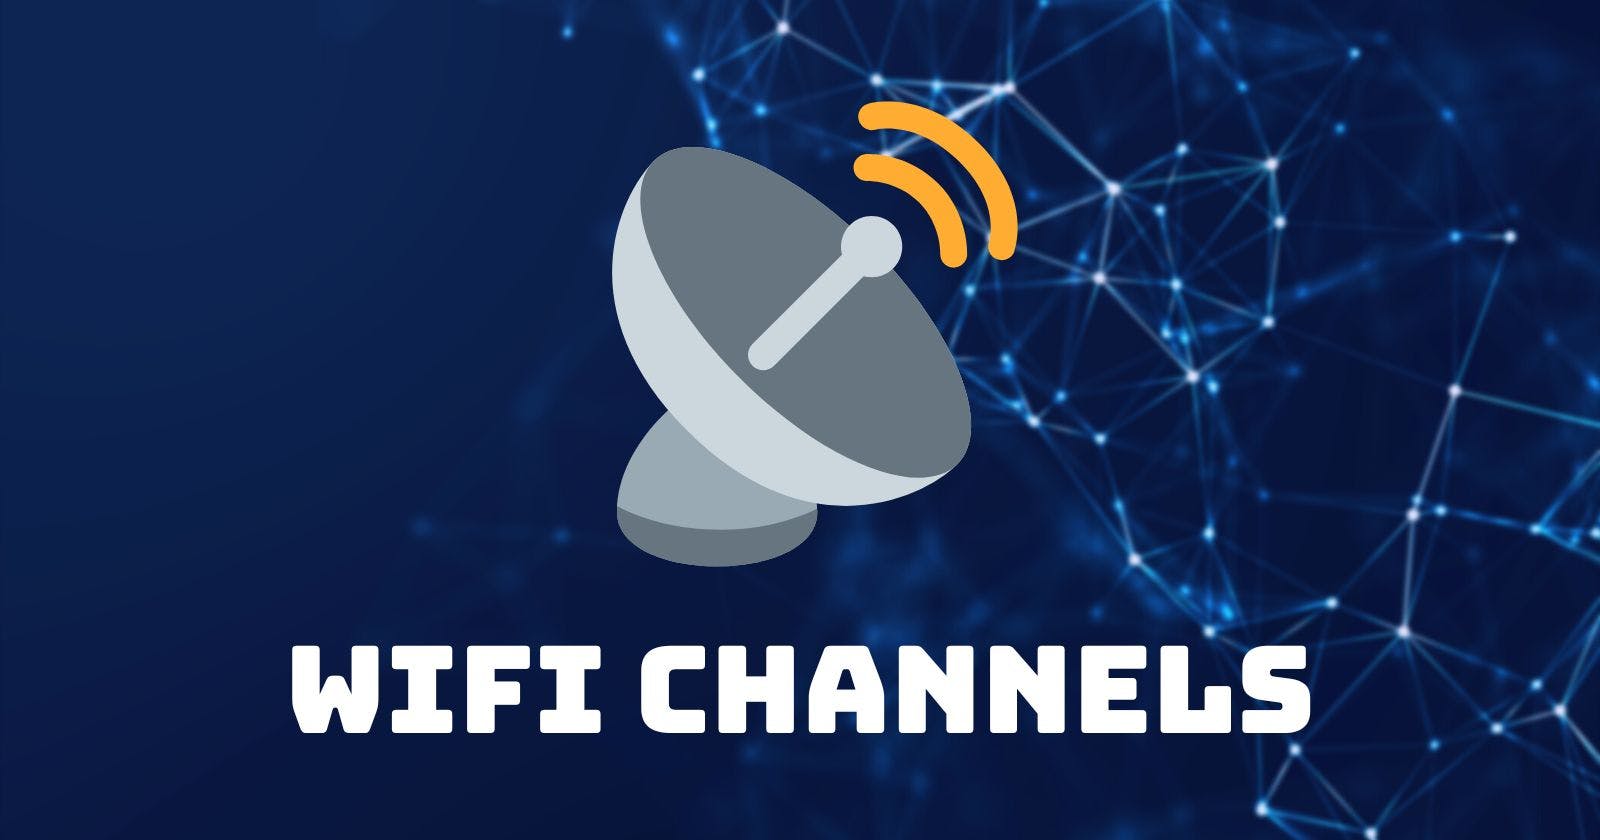 WiFi Channels Explained